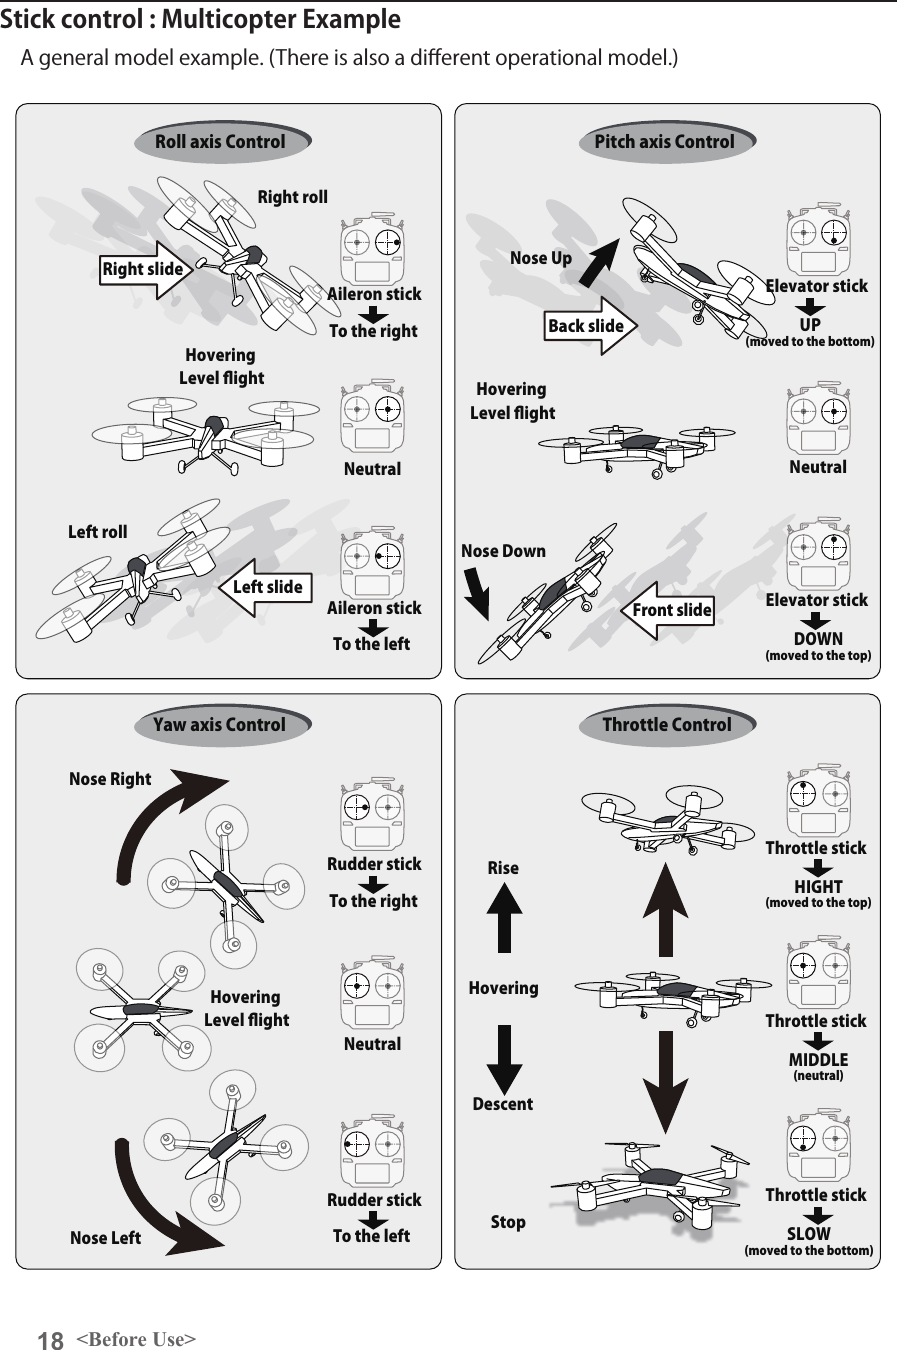 18 &lt;Before Use&gt;Stick control : Multicopter ExampleA general model example. (There is also a di󰮏erent operational model.)StopRight rollRight slideBack slideFront slideLeft slideLeft rollHoveringRiseDescentHoveringLevel ﬂight HoveringLevel ﬂightHoveringLevel ﬂightAileron stickTo the rightNeutral NeutralNose UpNose DownRoll axis ControlYaw axis Control Throttle ControlElevator stickUP(moved to the bottom)Elevator stickDOWN(moved to the top)Aileron stickTo the leftPitch axis ControlRudder stickTo the rightNeutralRudder stickTo the leftNose RightNose LeftThrottle stickMIDDLE(neutral)Throttle stickHIGHT(moved to the top)Throttle stickSLOW(moved to the bottom)